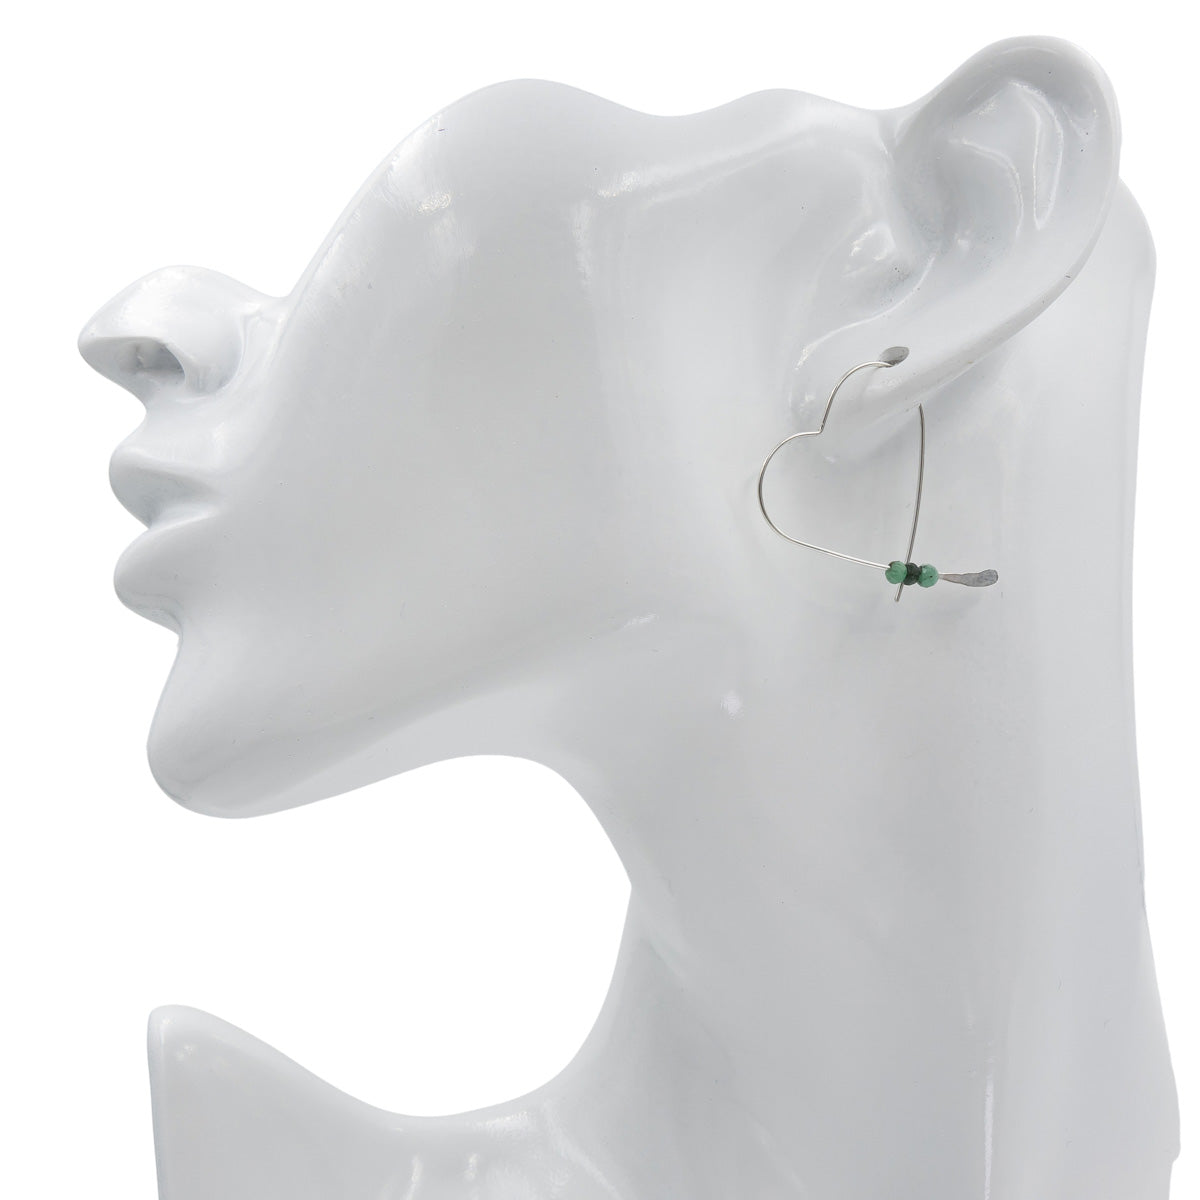 Earth Song Jewelry Handmade Sterling Silver Heart Earrings with Emerald stones on mannequin head